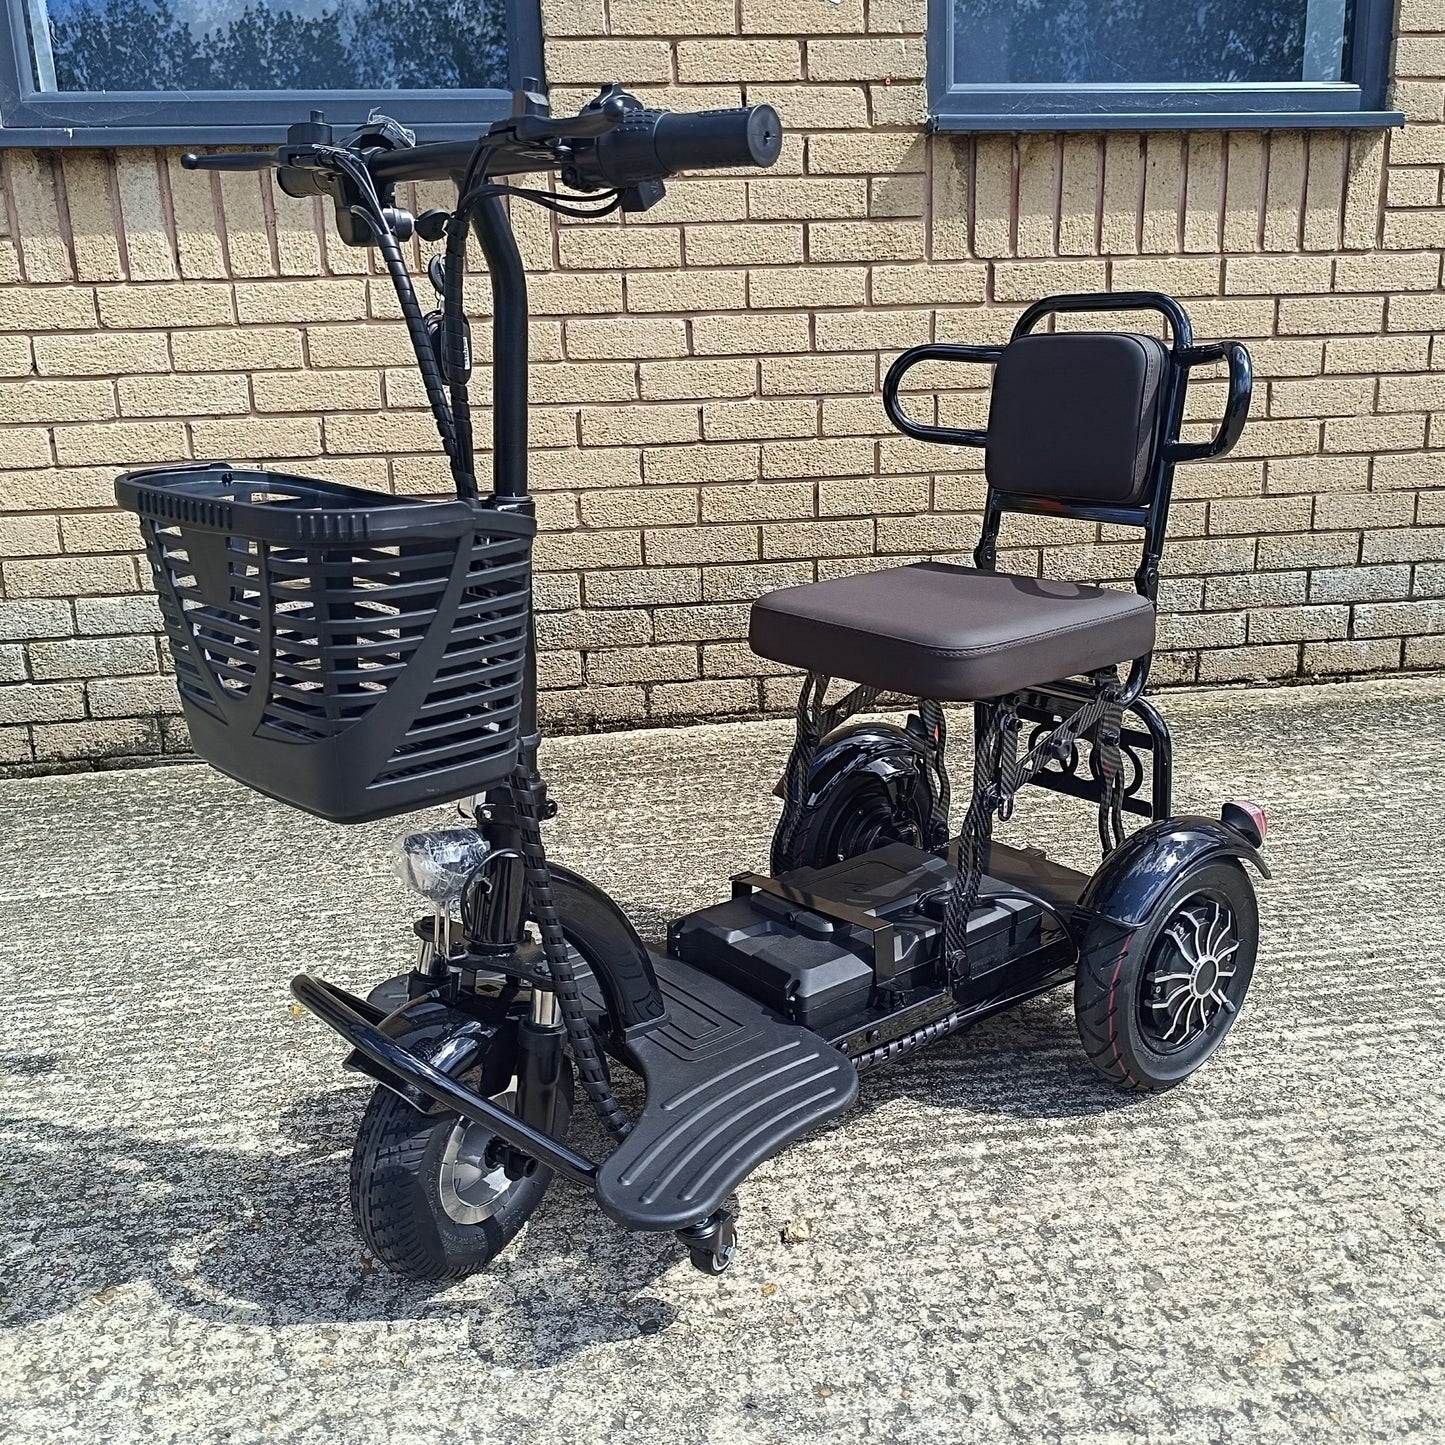 The Easy Folding 3 Wheel Mobility Scooter